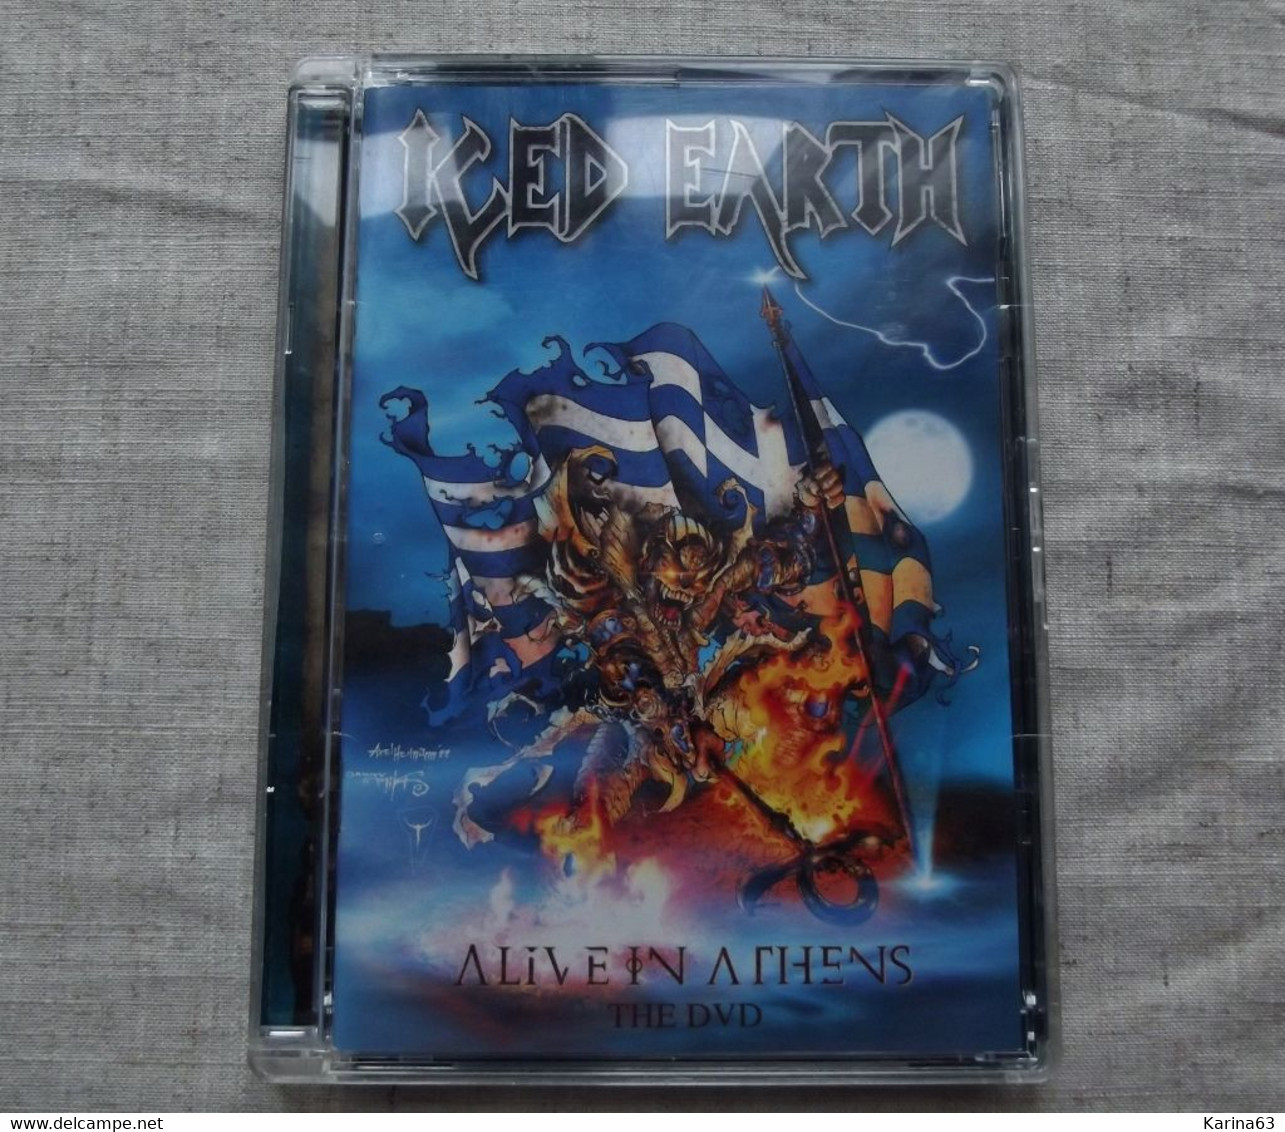 Iced Earth - Alive In Athens - 2007 - Muziek DVD's